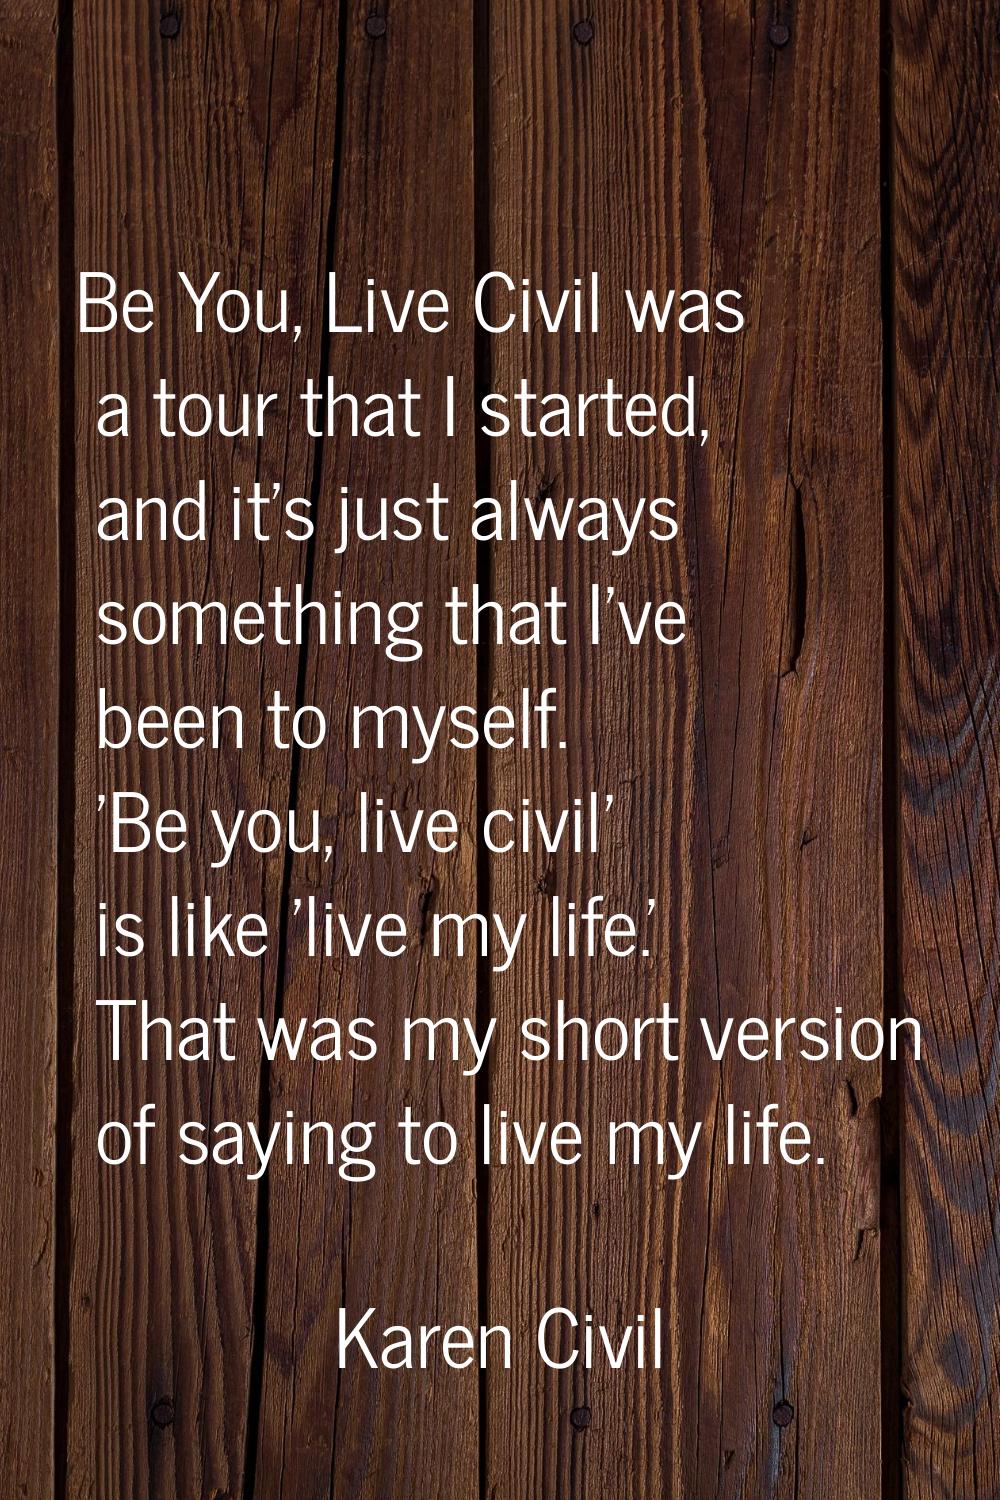 Be You, Live Civil was a tour that I started, and it's just always something that I've been to myse